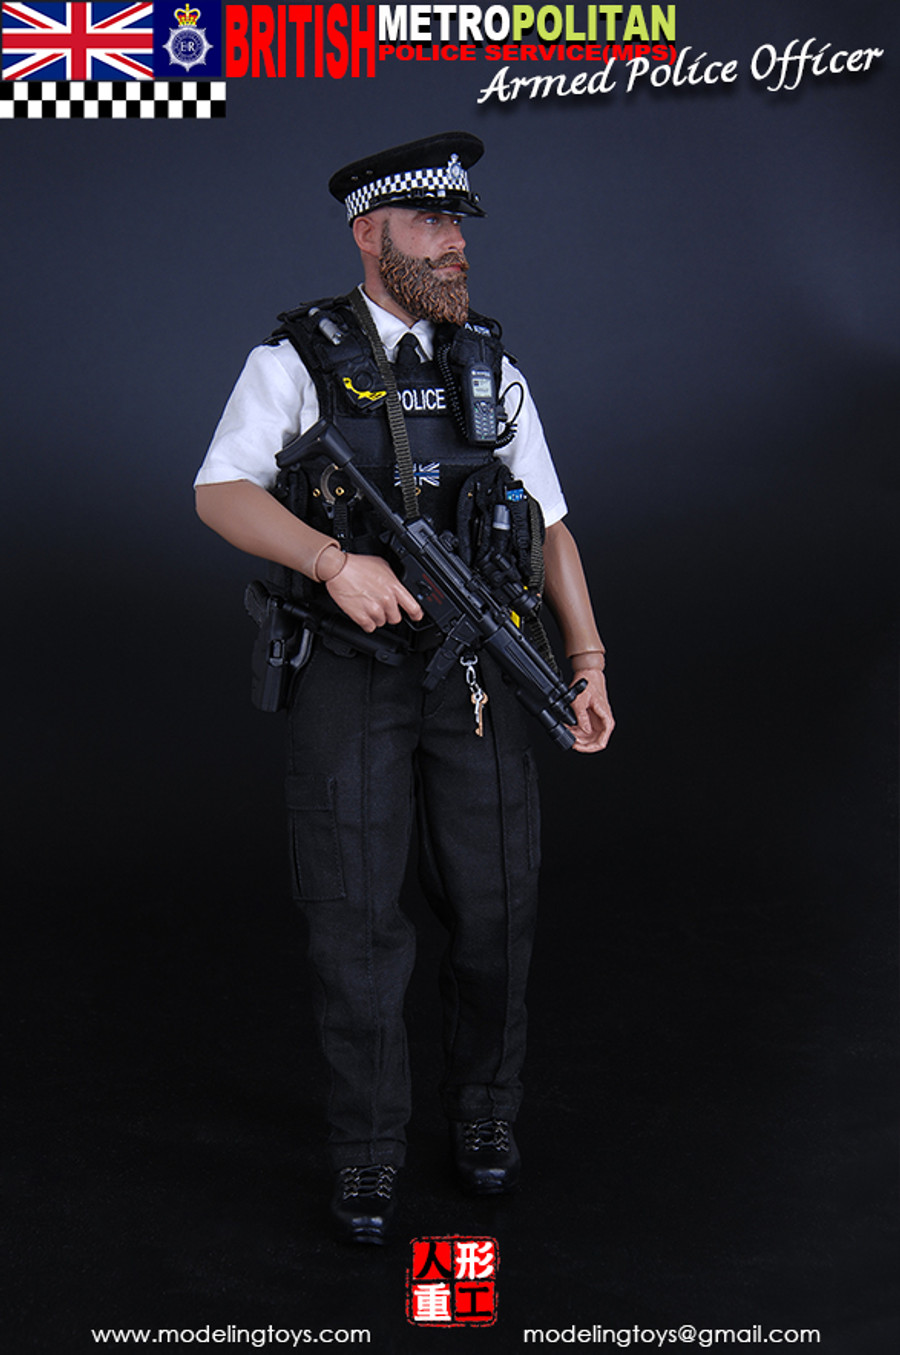 Modeling Toys - Military Series: British Metropolitan Police Service - Armed Police Officer